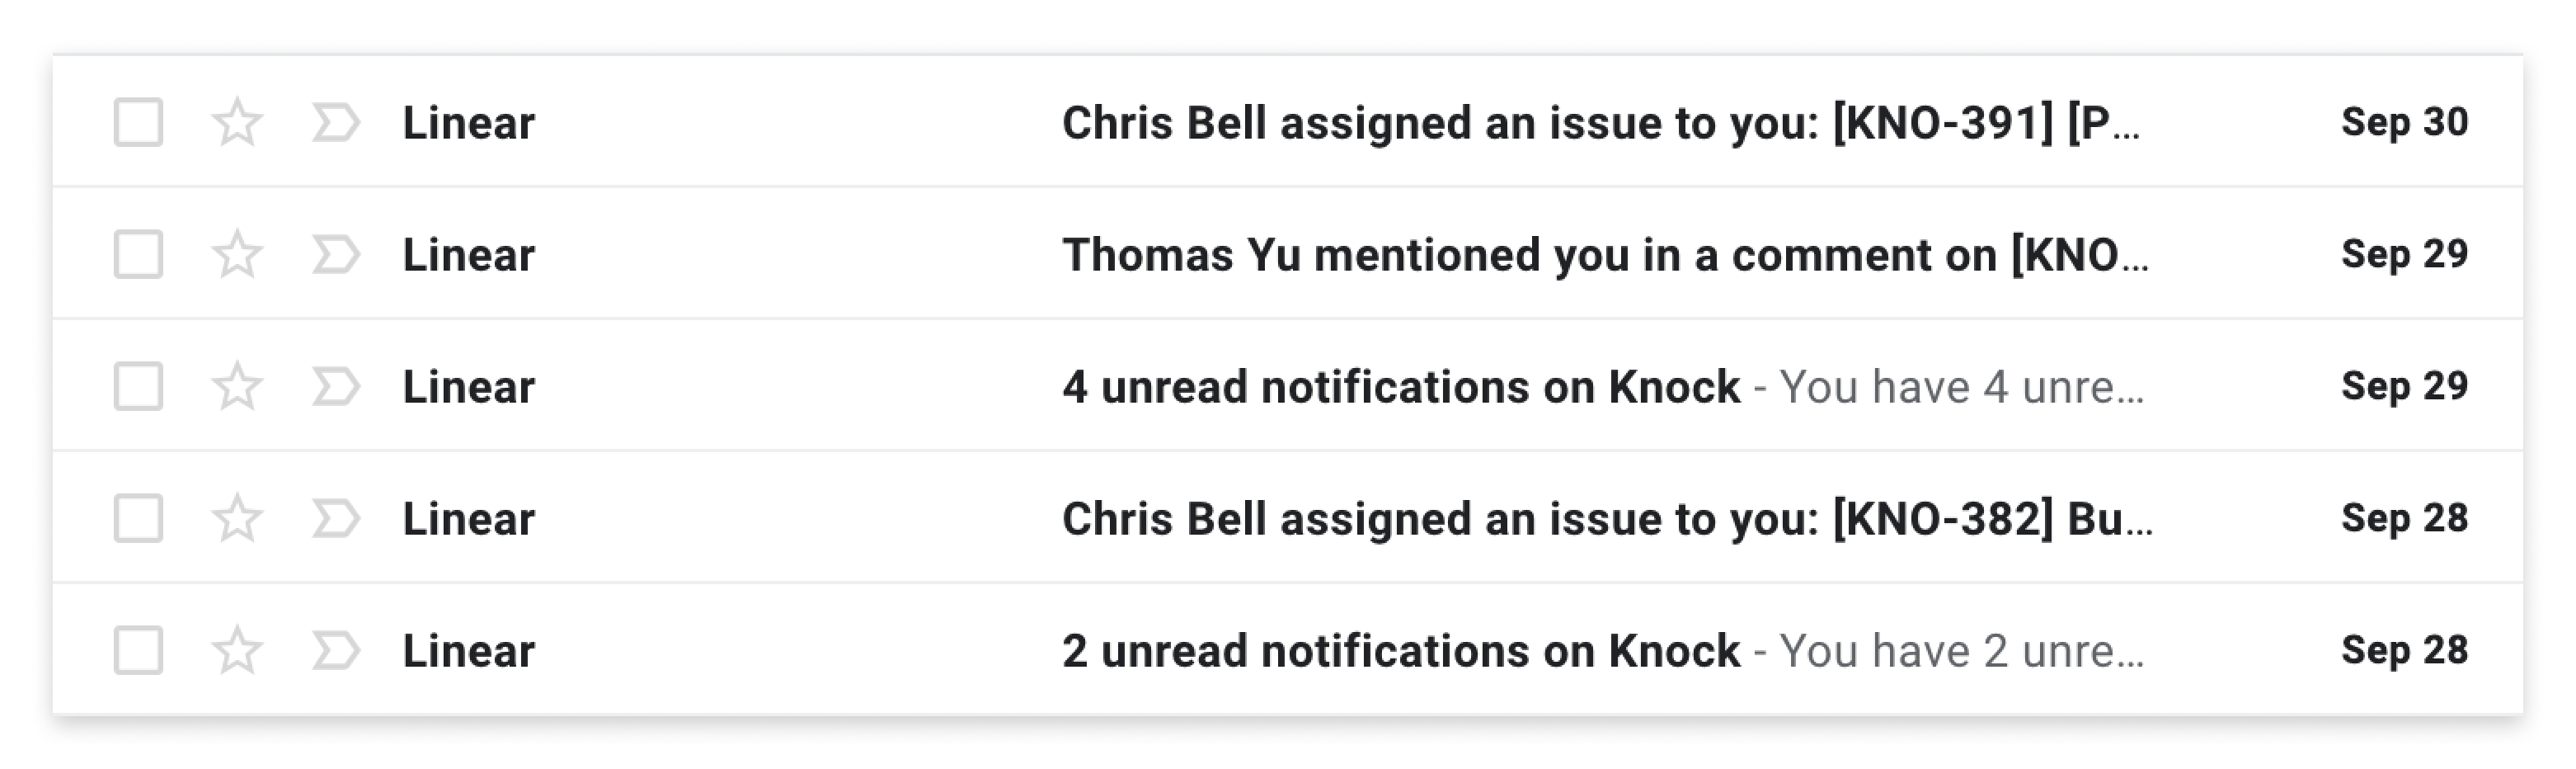 A good example of email notifications with varying priority and threading behavior